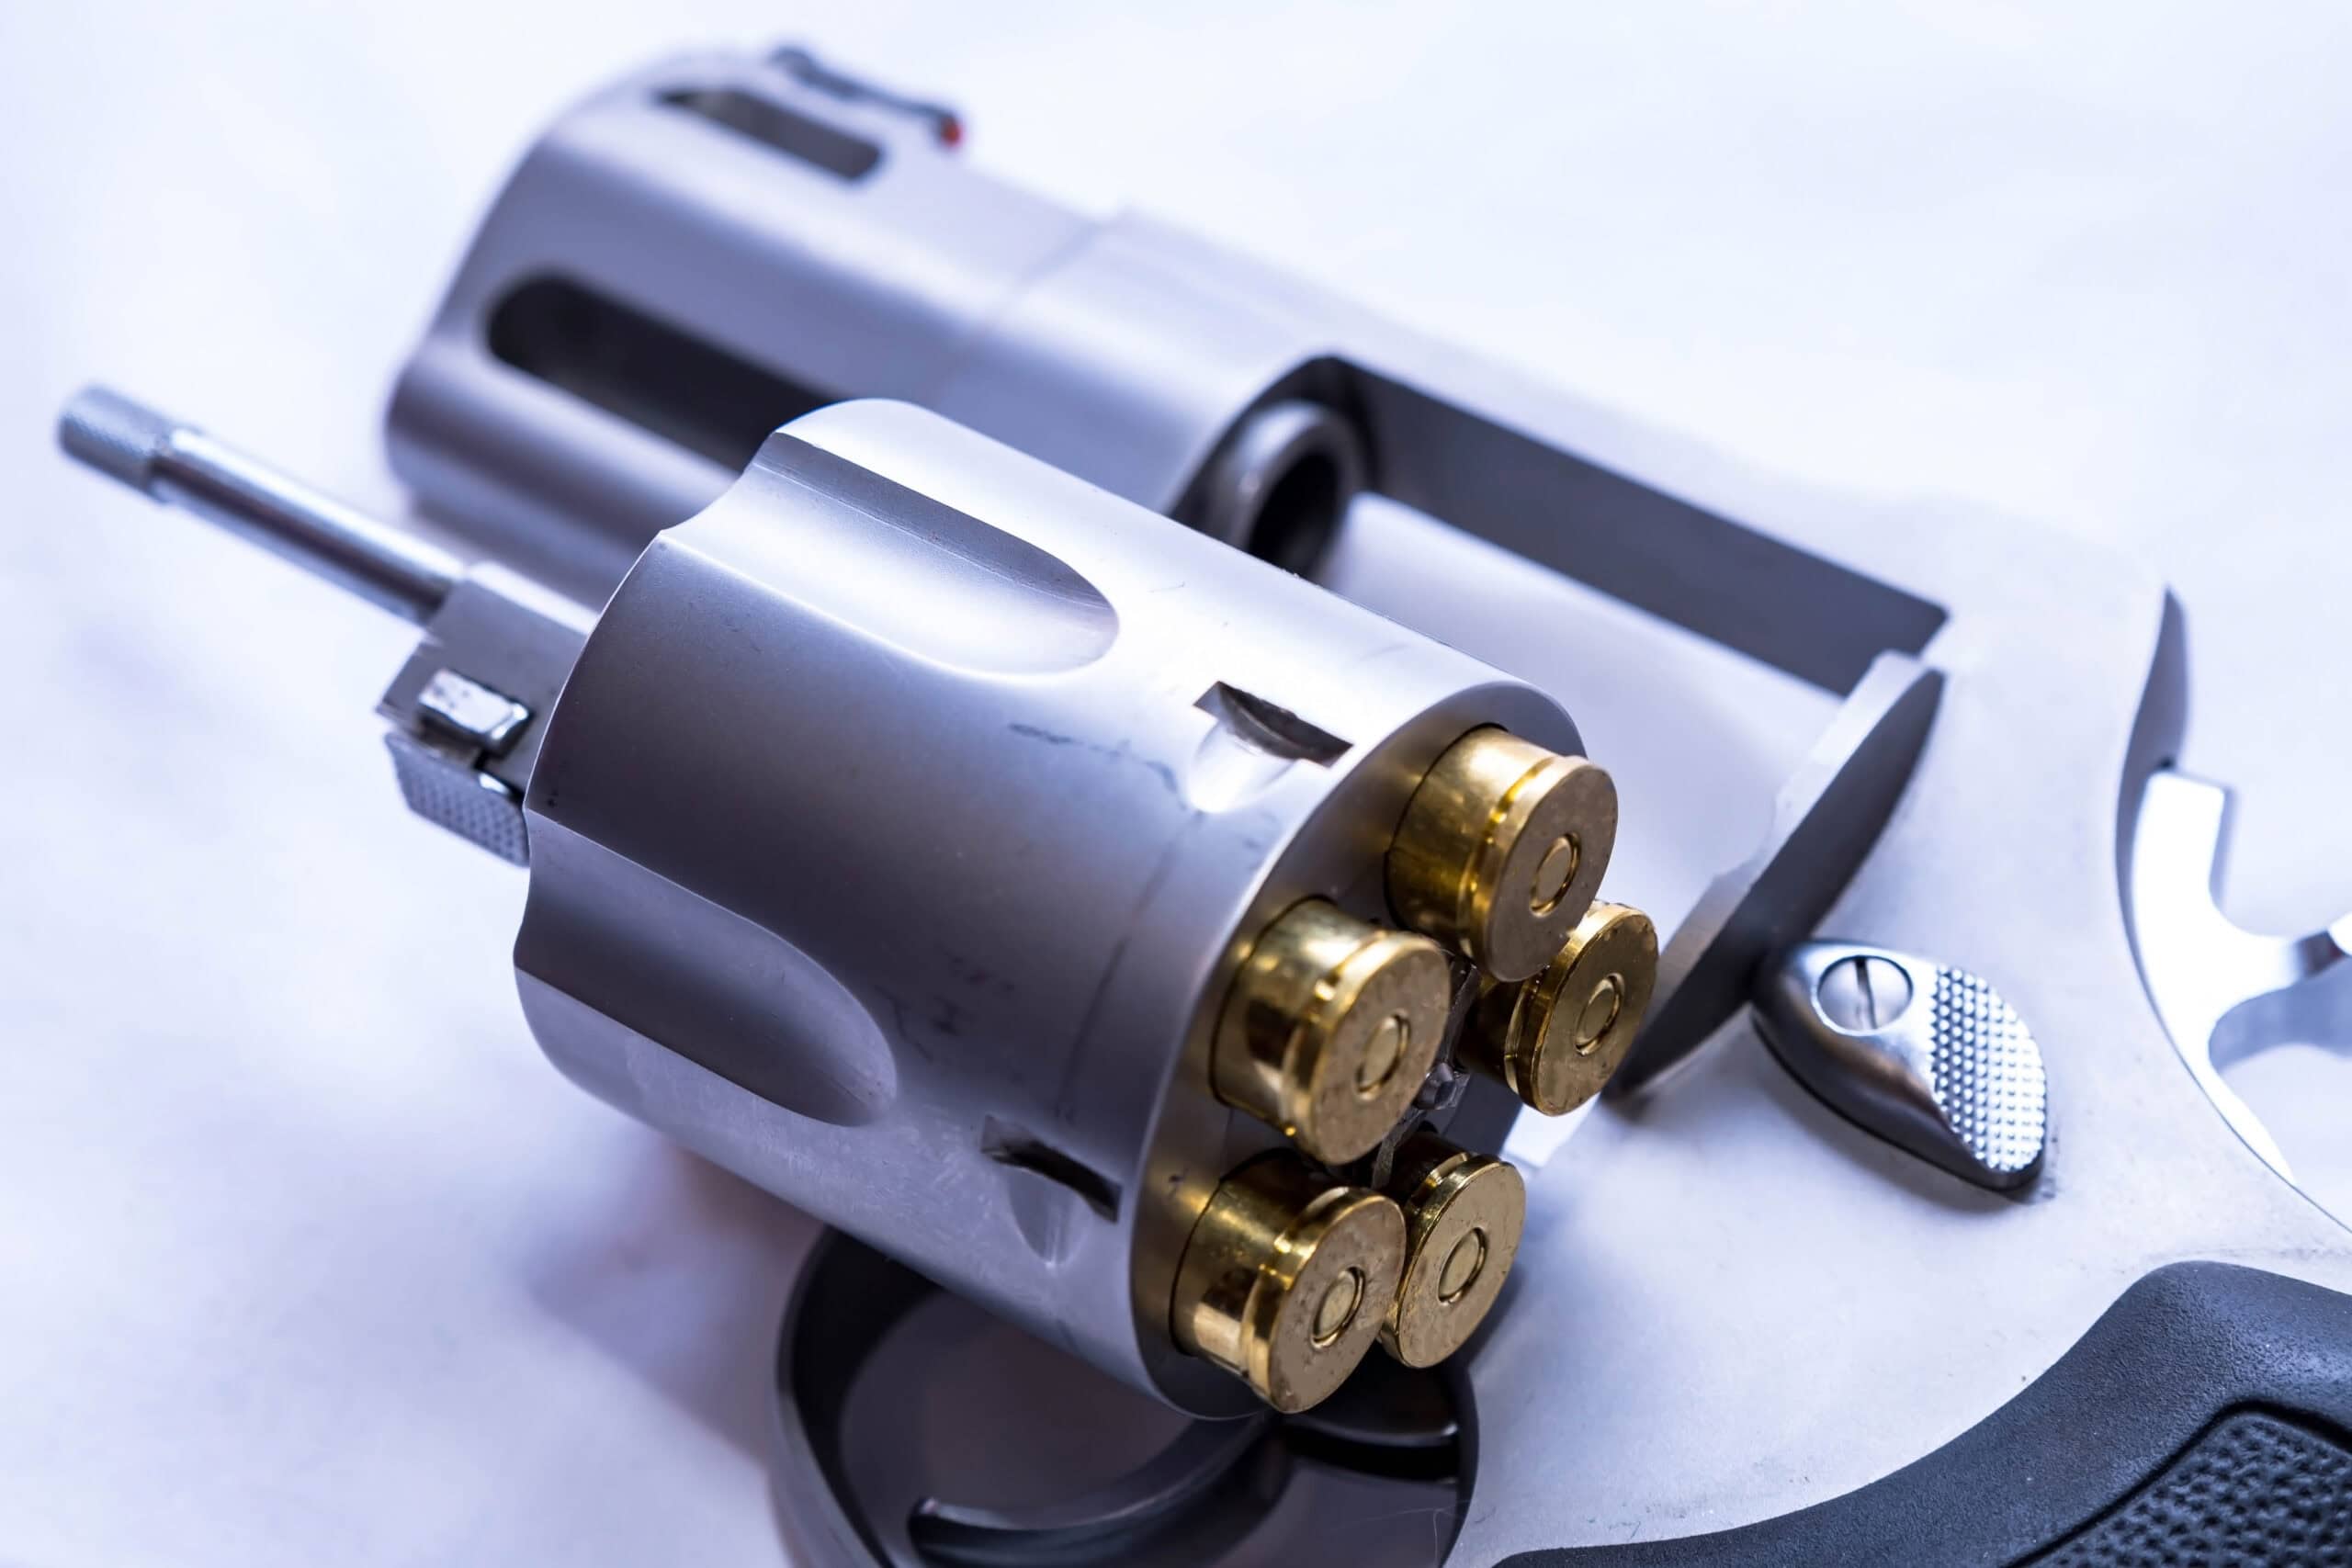 A 454 casull revolver with an opened loaded cylinder